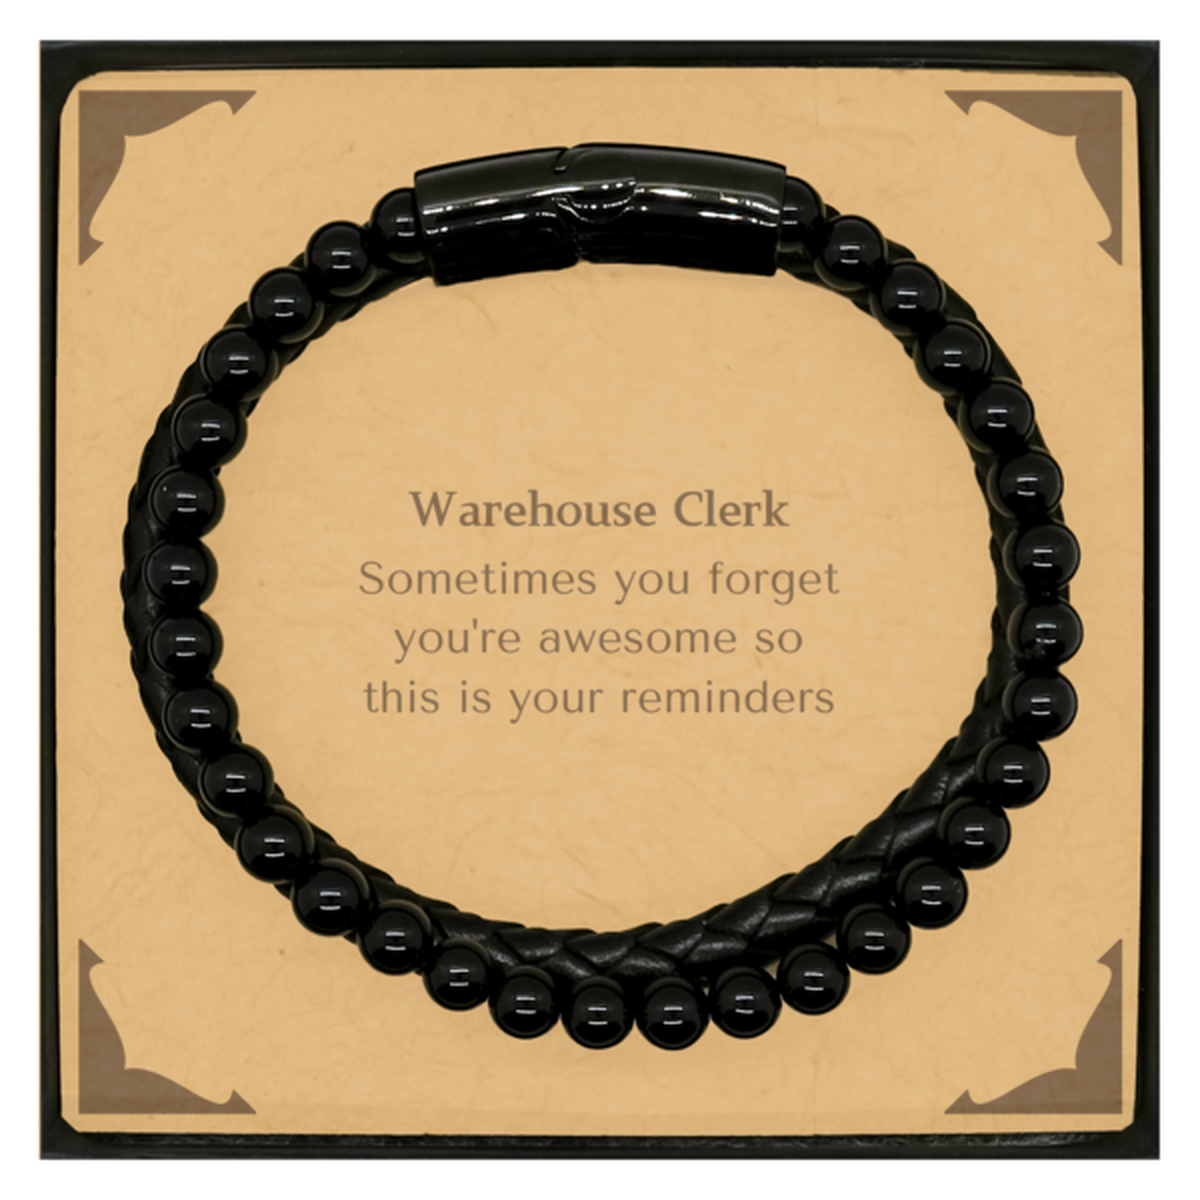 Sentimental Warehouse Clerk Stone Leather Bracelets, Warehouse Clerk Sometimes you forget you're awesome so this is your reminders, Graduation Christmas Birthday Gifts for Warehouse Clerk, Men, Women, Coworkers